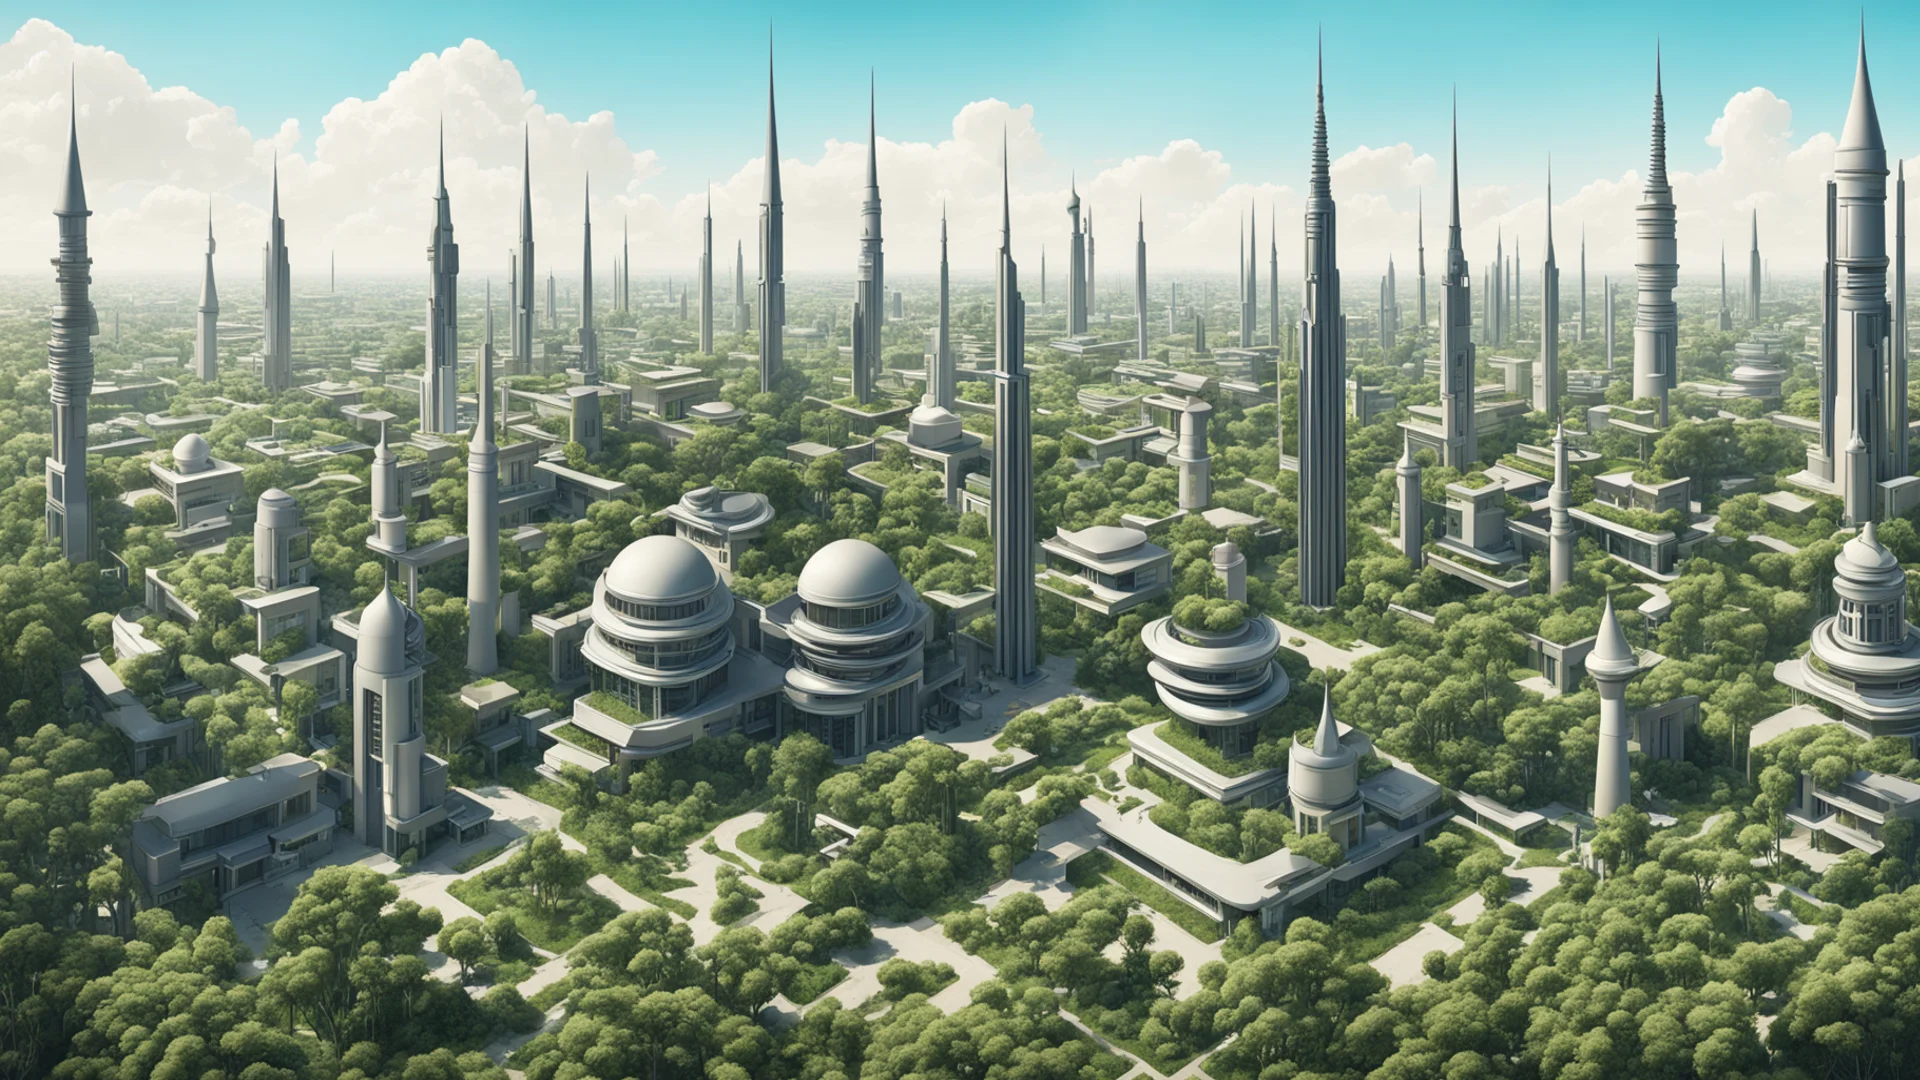 highly detailed futuristic suburban area with a minaret in between and vegetation in forms of buildings   amazing awesome portrait 2 wide